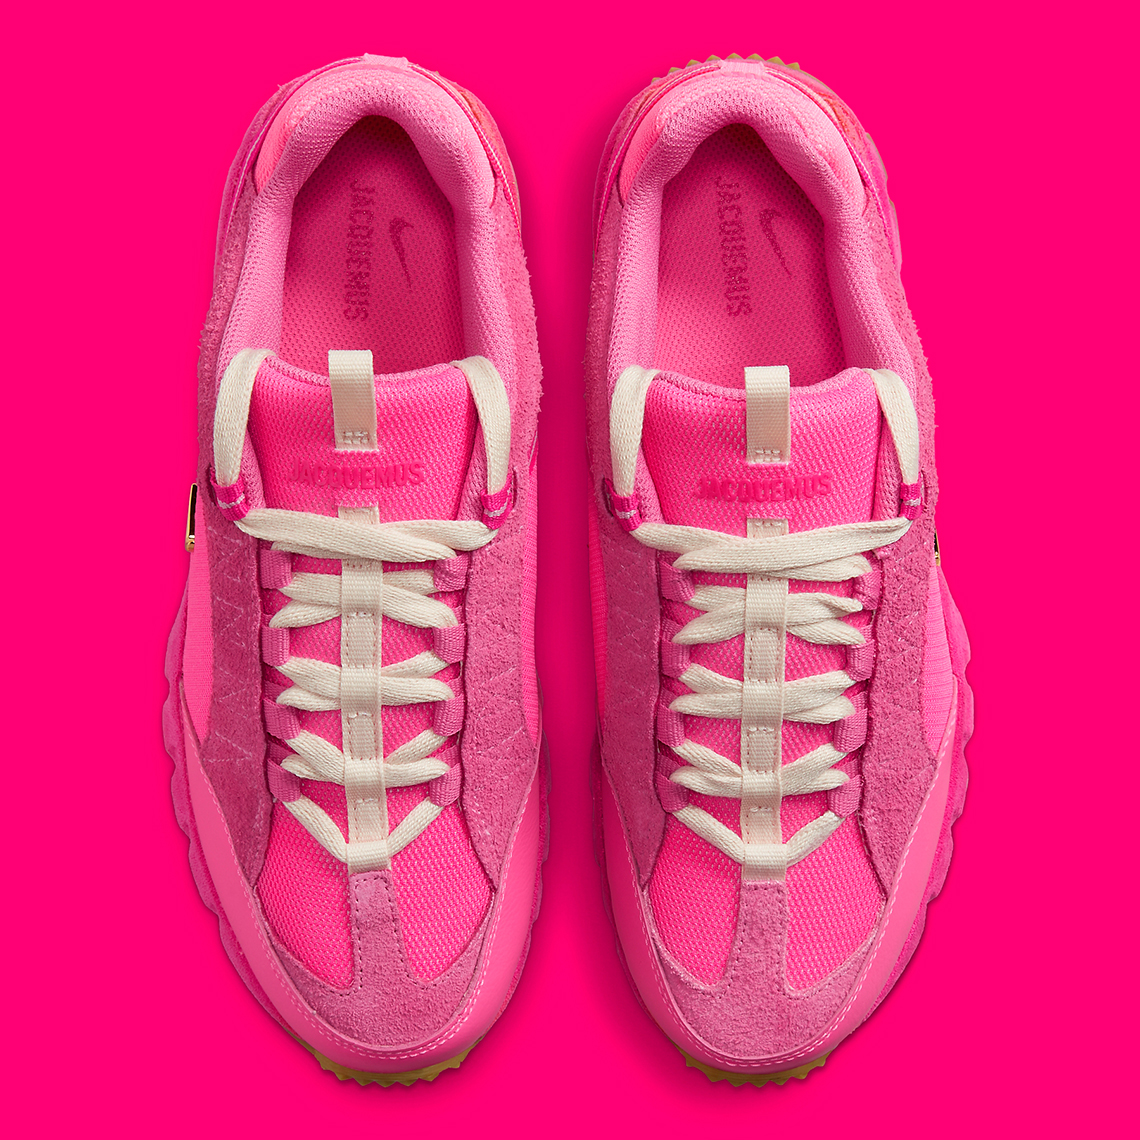 The Jacquemus x Nike sneakers will be available in hot pink